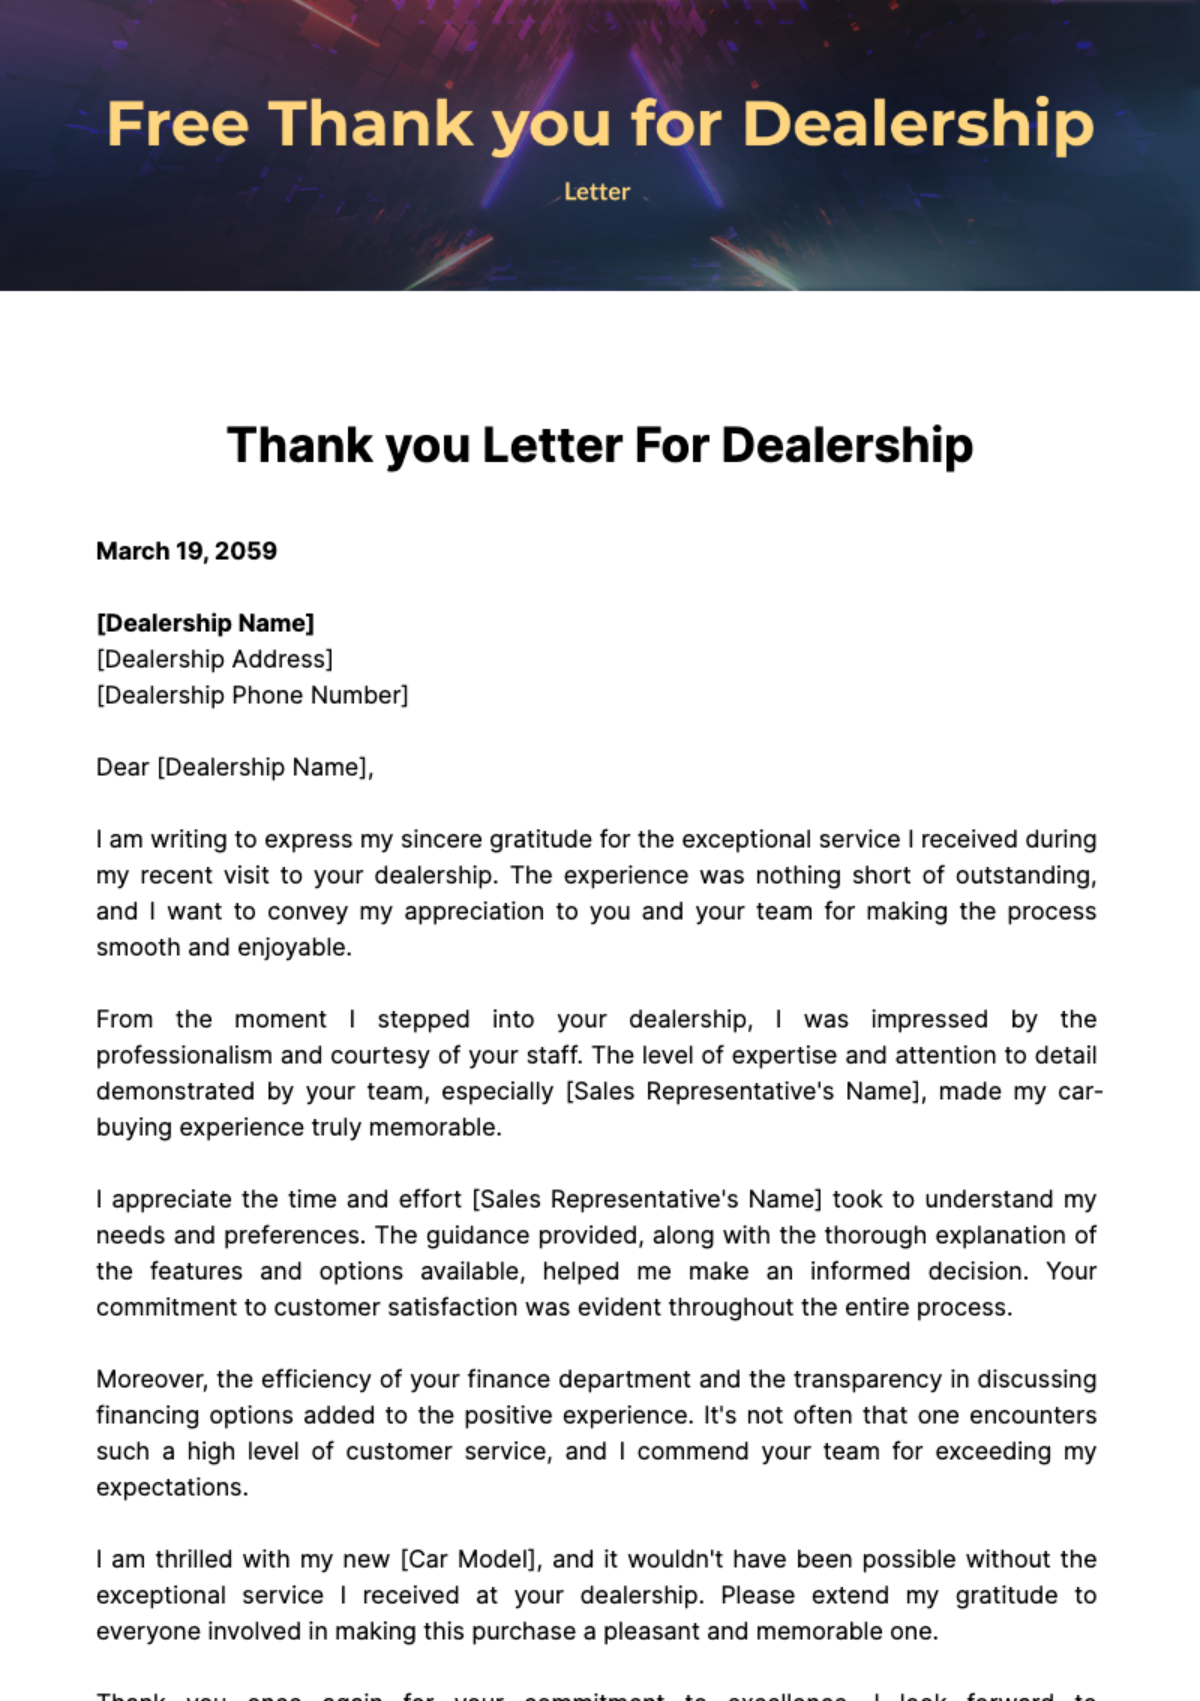 Free Thank you Letter for Dealership Template